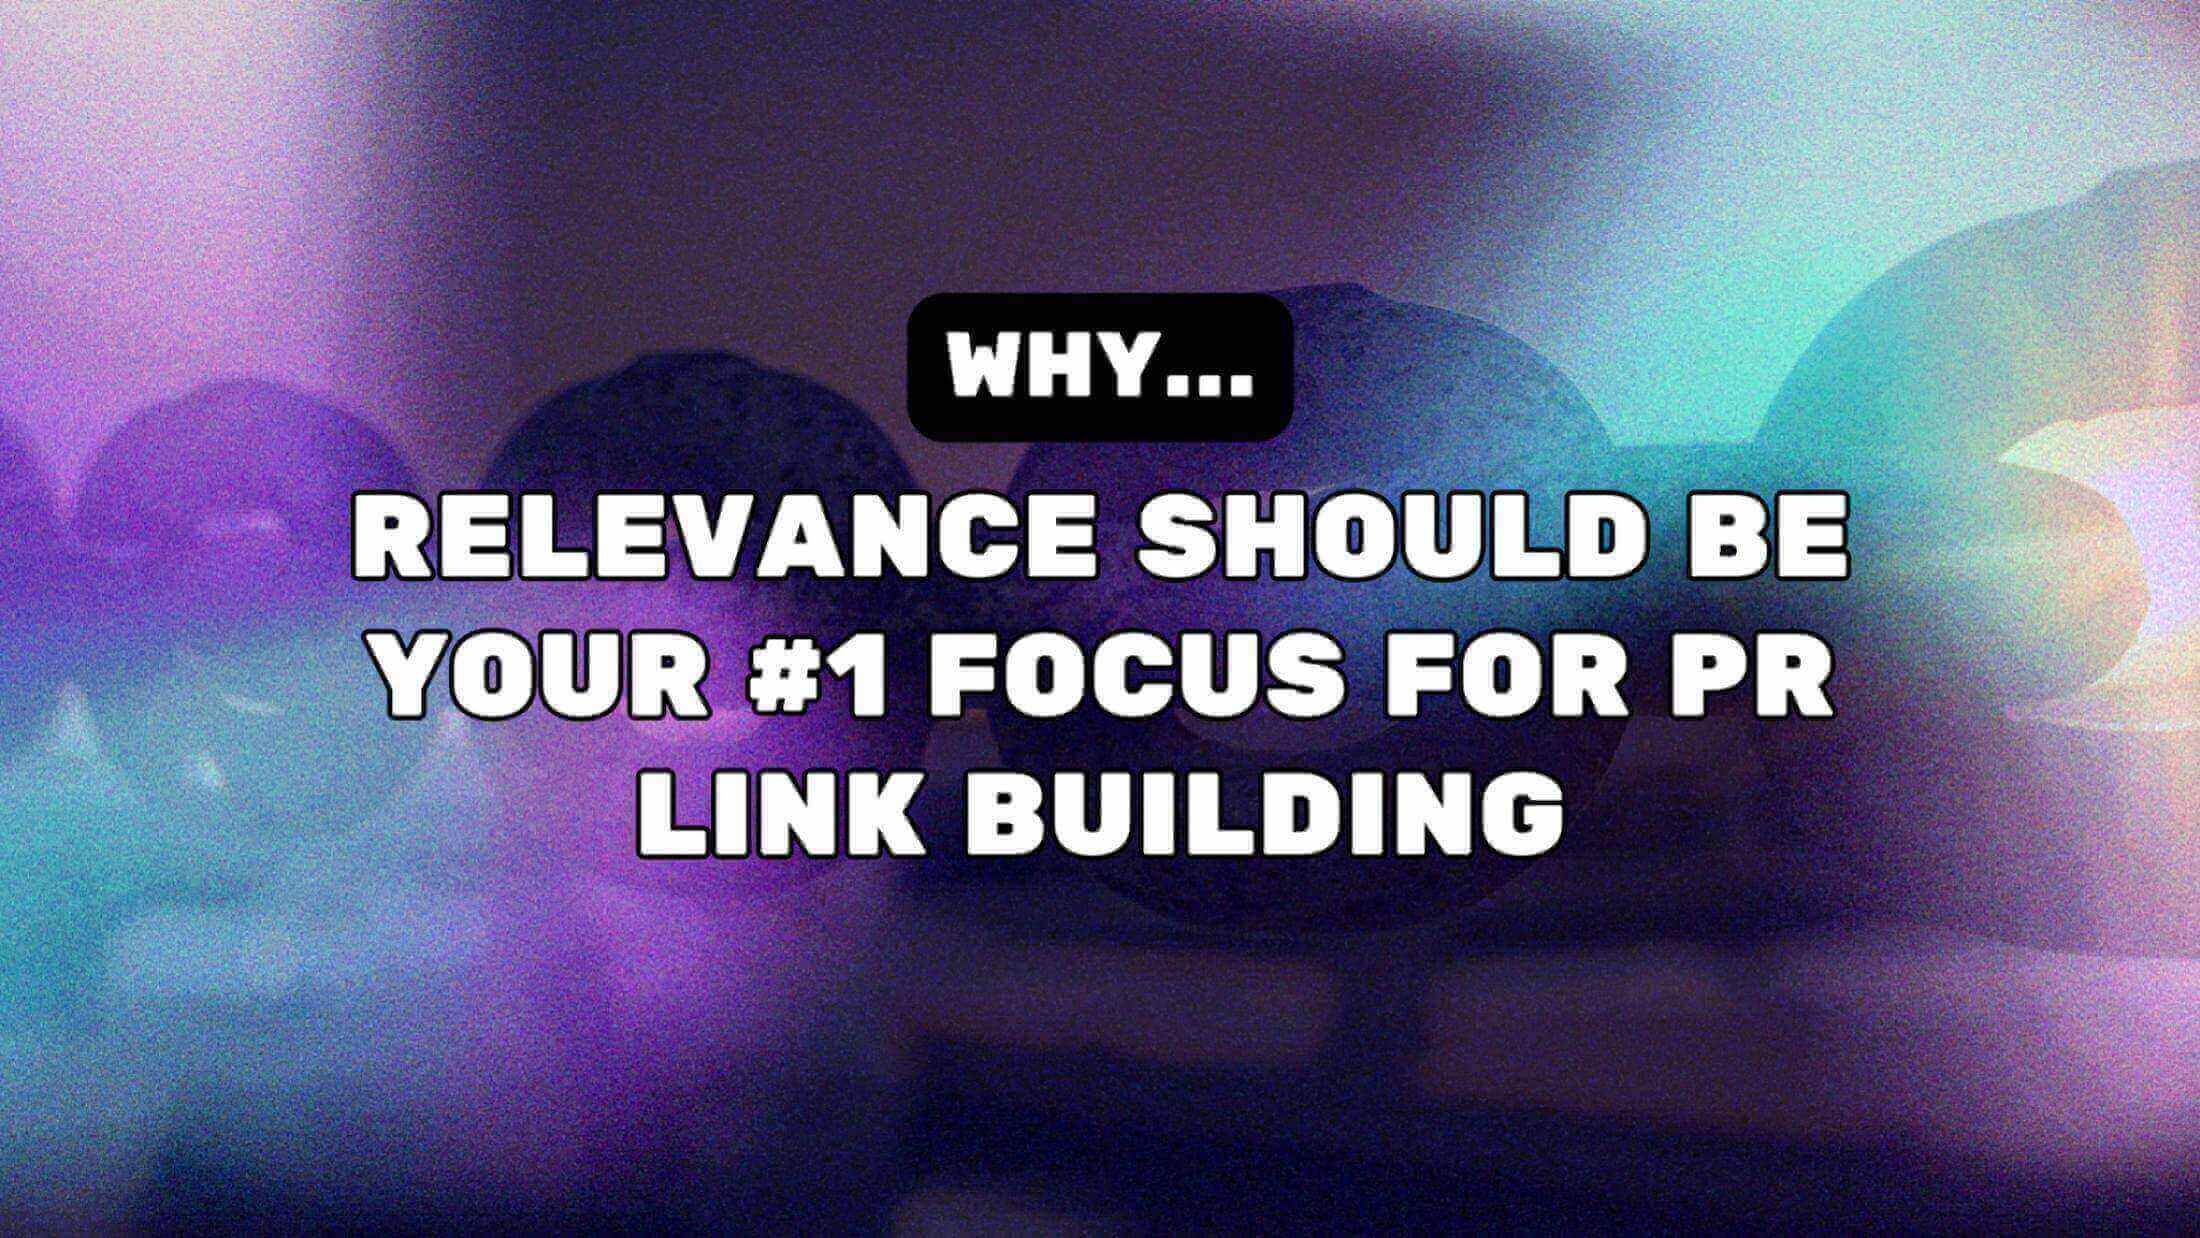 Why Relevance Should Be Your #1 Focus For PR Link Building